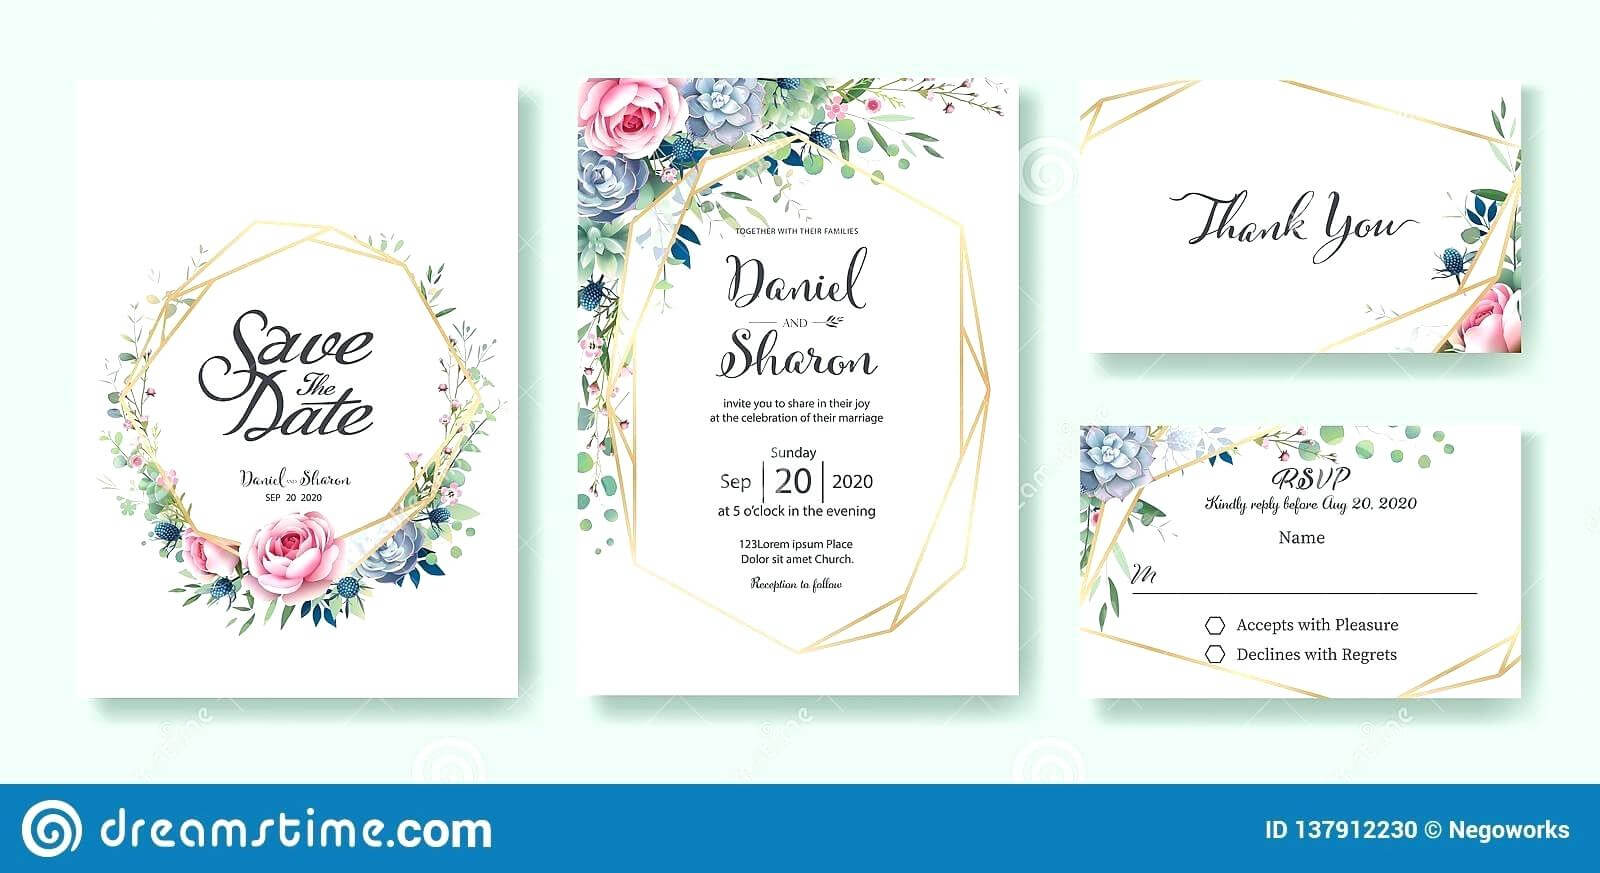 Wedding Invitation Save The Date Thank You Card Template For Church Wedding Invitation Card Template